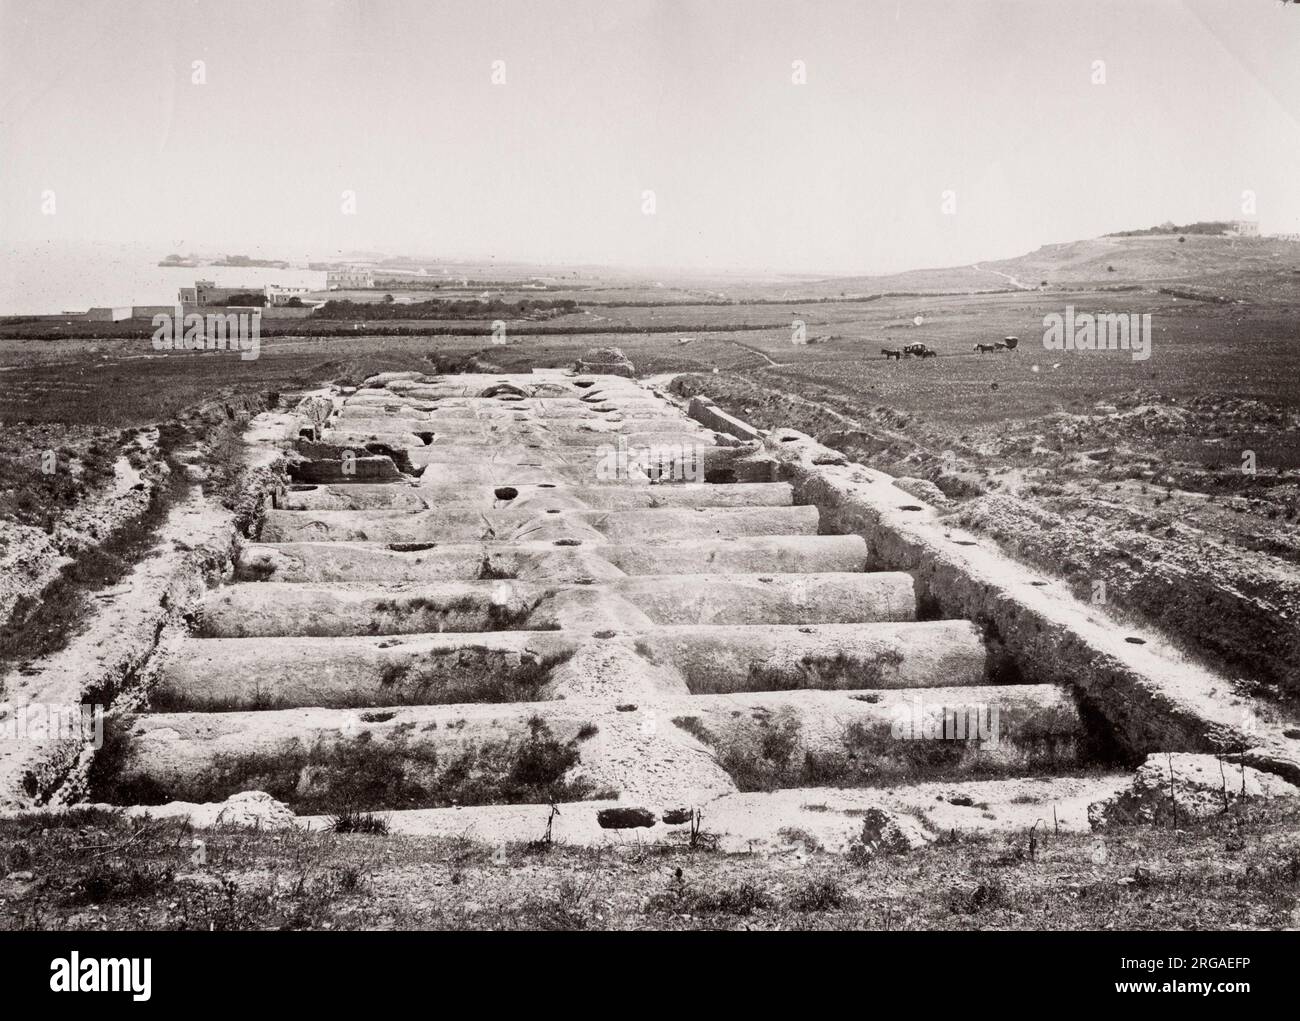 Vintage 19th century photograph: The Cisterns of La Malga or Cisterns of La Maalga are a group of cisterns, which are among the most visible features of the archaeological site of Carthage near Tunis, Tunisia. They are some of the best preserved Roman cisterns. Stock Photo